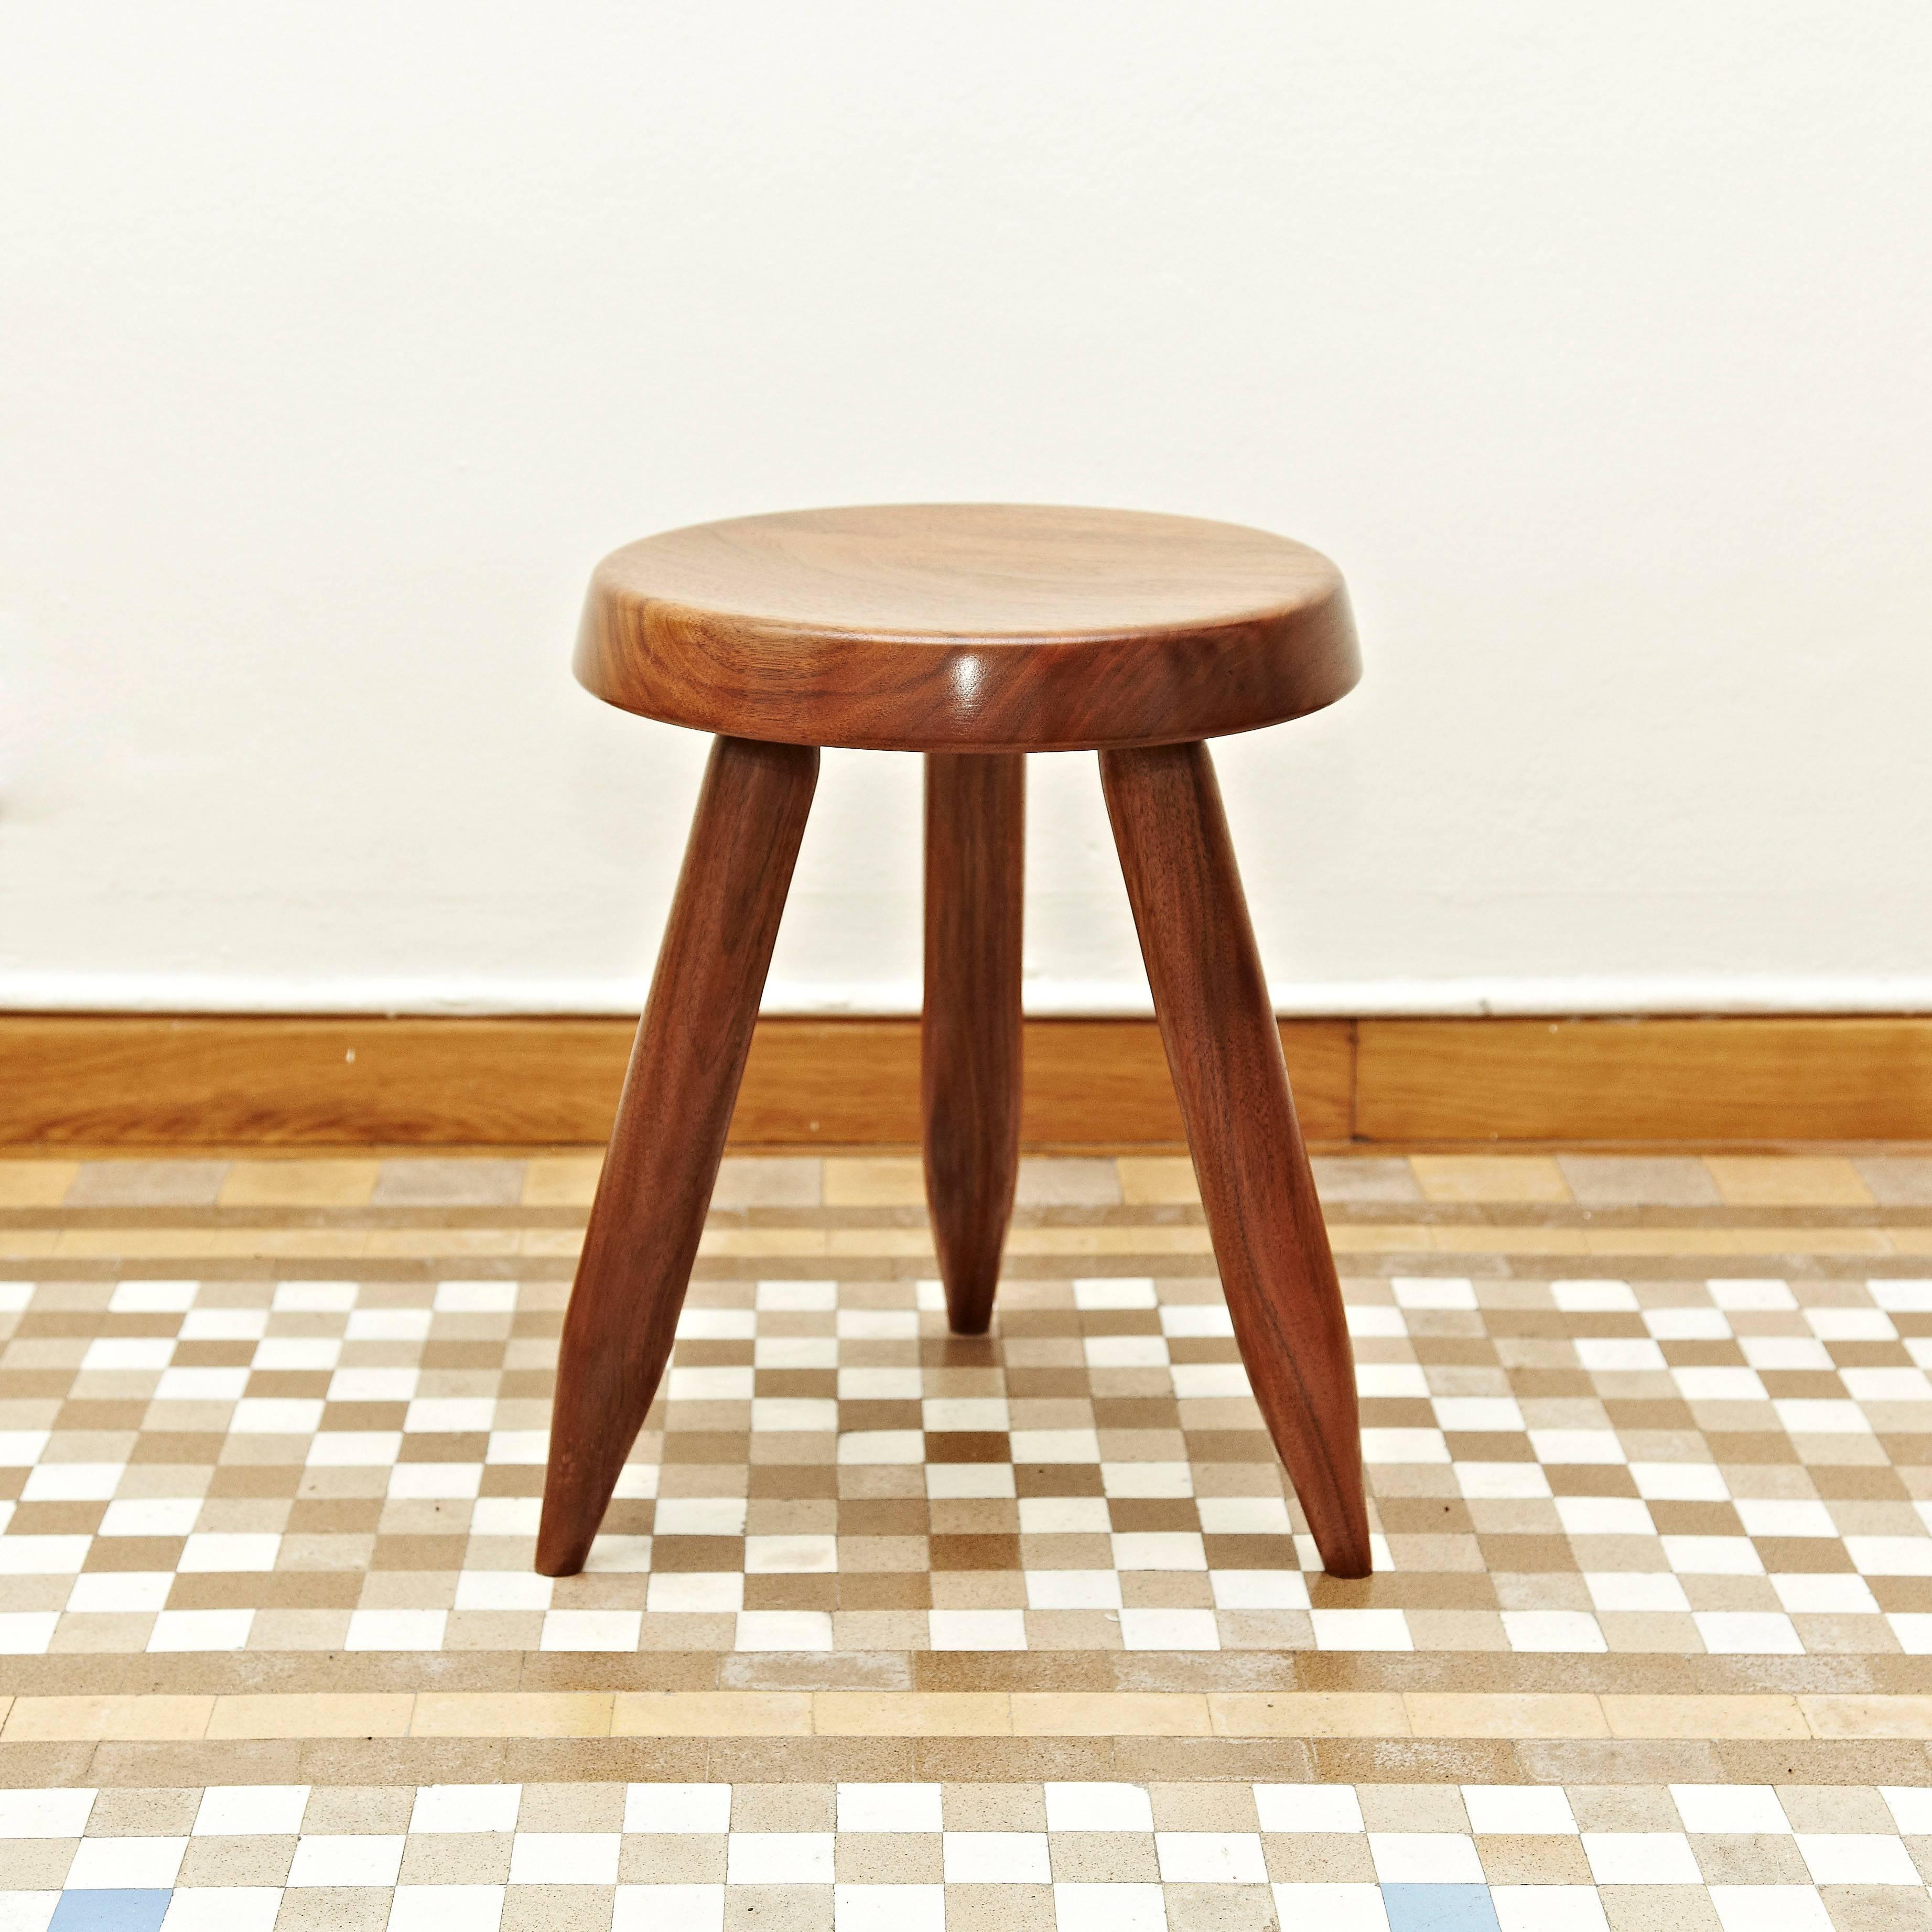 Stool designed in the style of Charlotte Perriand, made by unknown manufacturer.

In good original condition, preserving a beautiful patina, with minor wear consistent with age and use.

Charlotte Perriand (1903-1999) She was born in Paris in